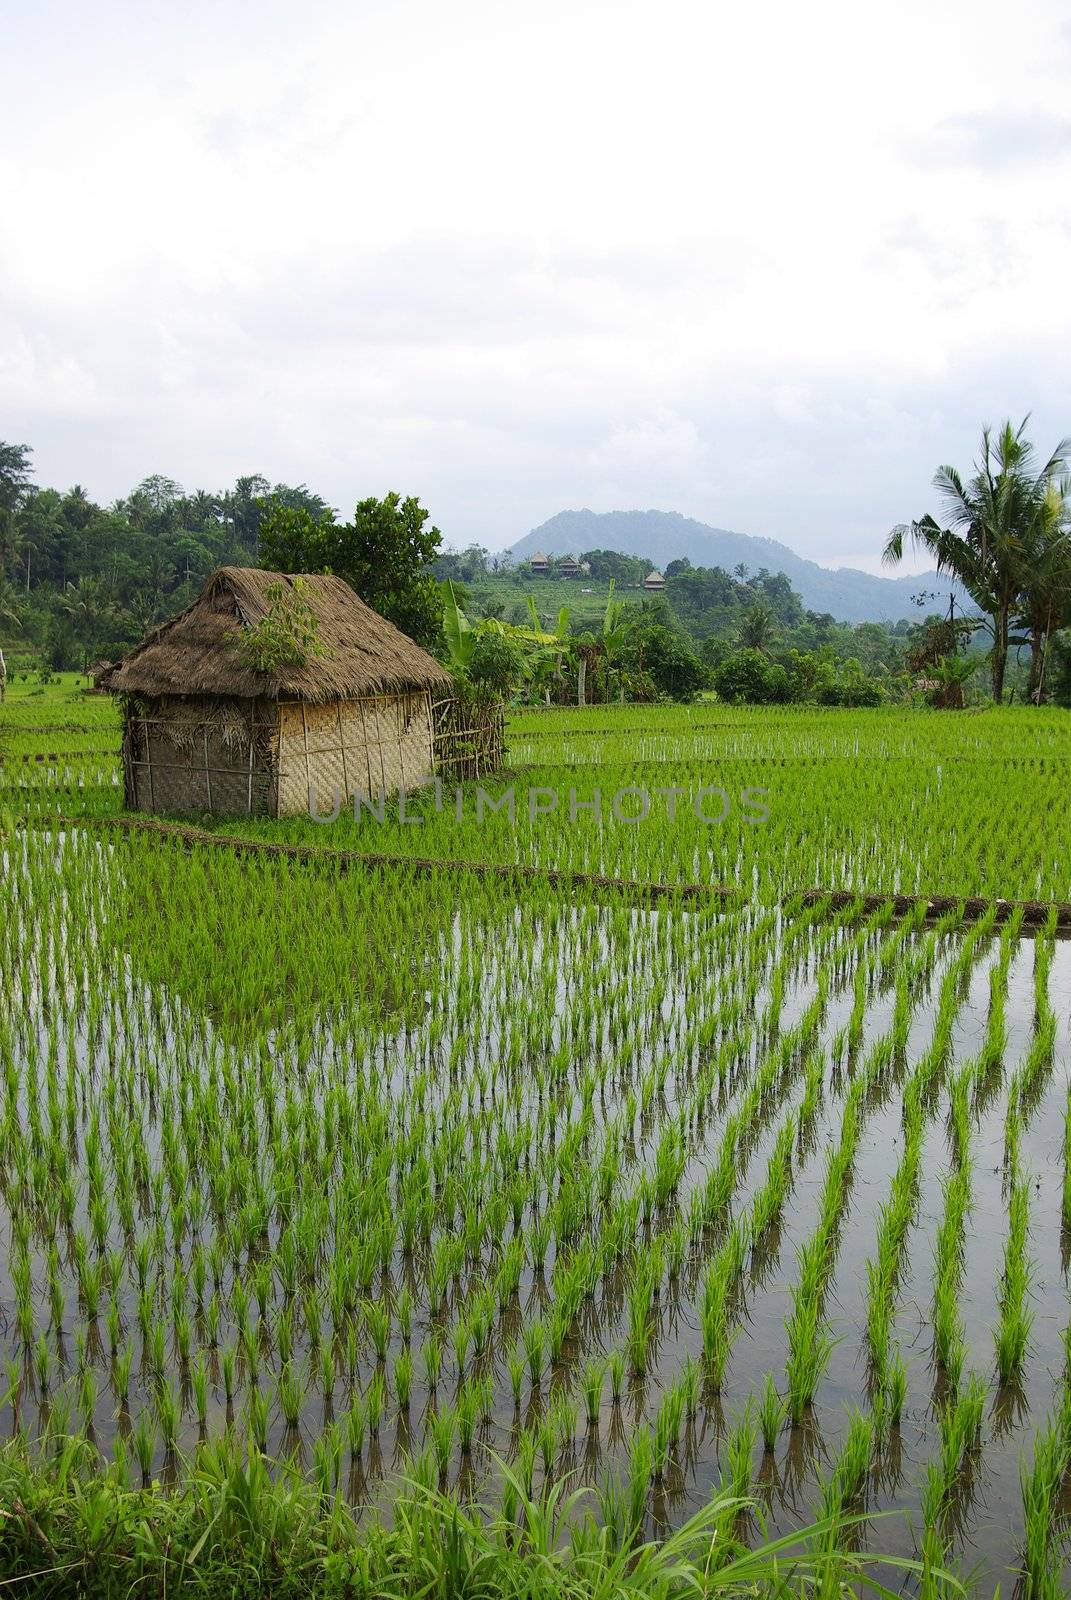 Young watered ricefield with a little hut in Bali island by shkyo30